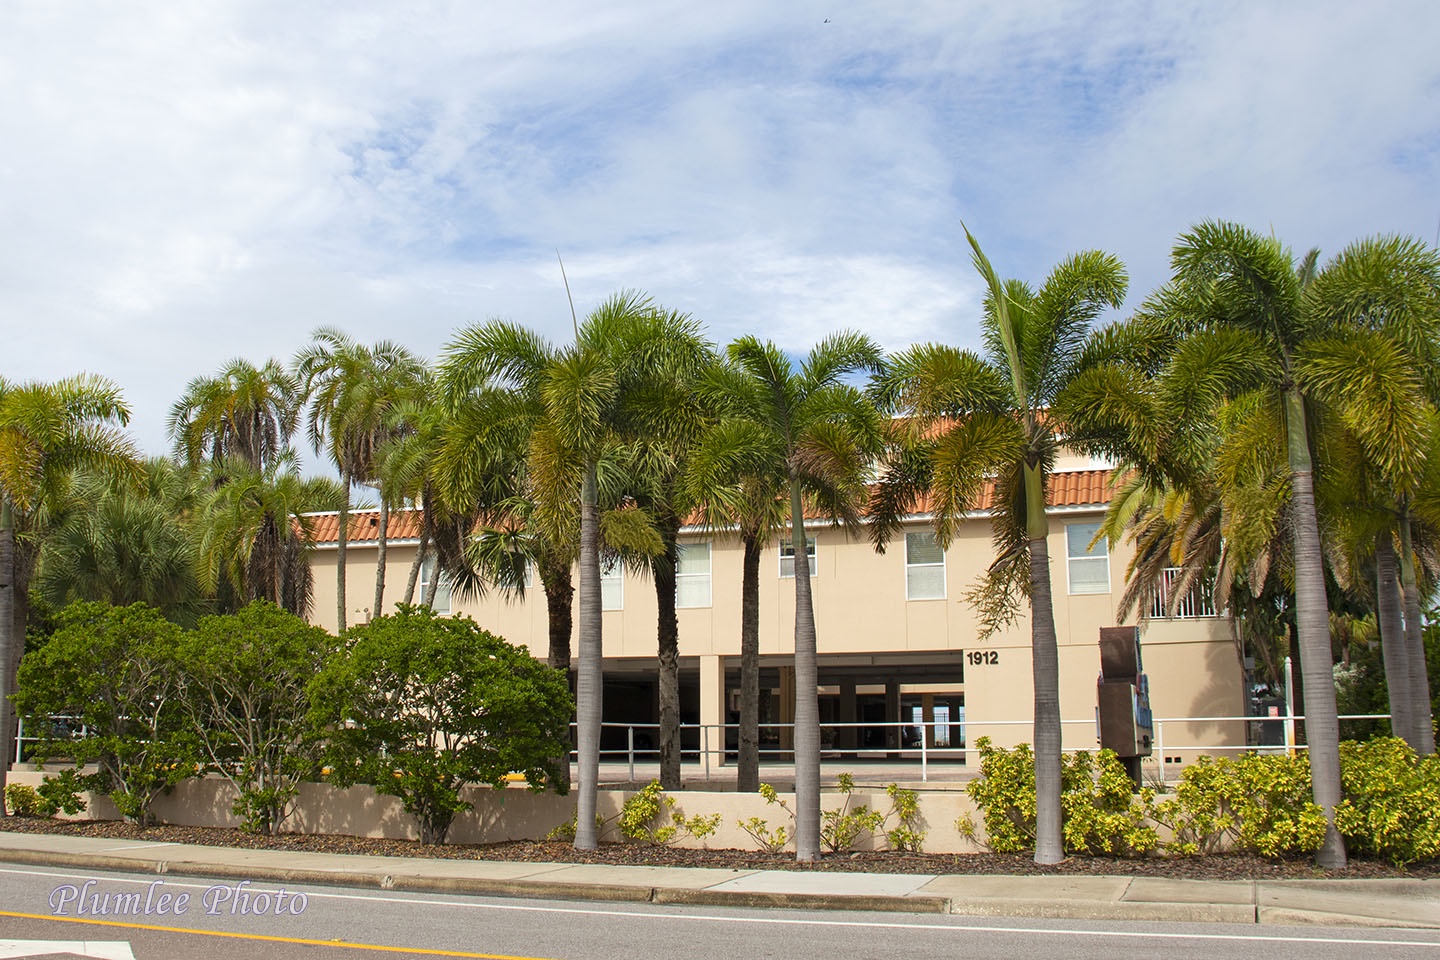 The street side of the Oceanway building.